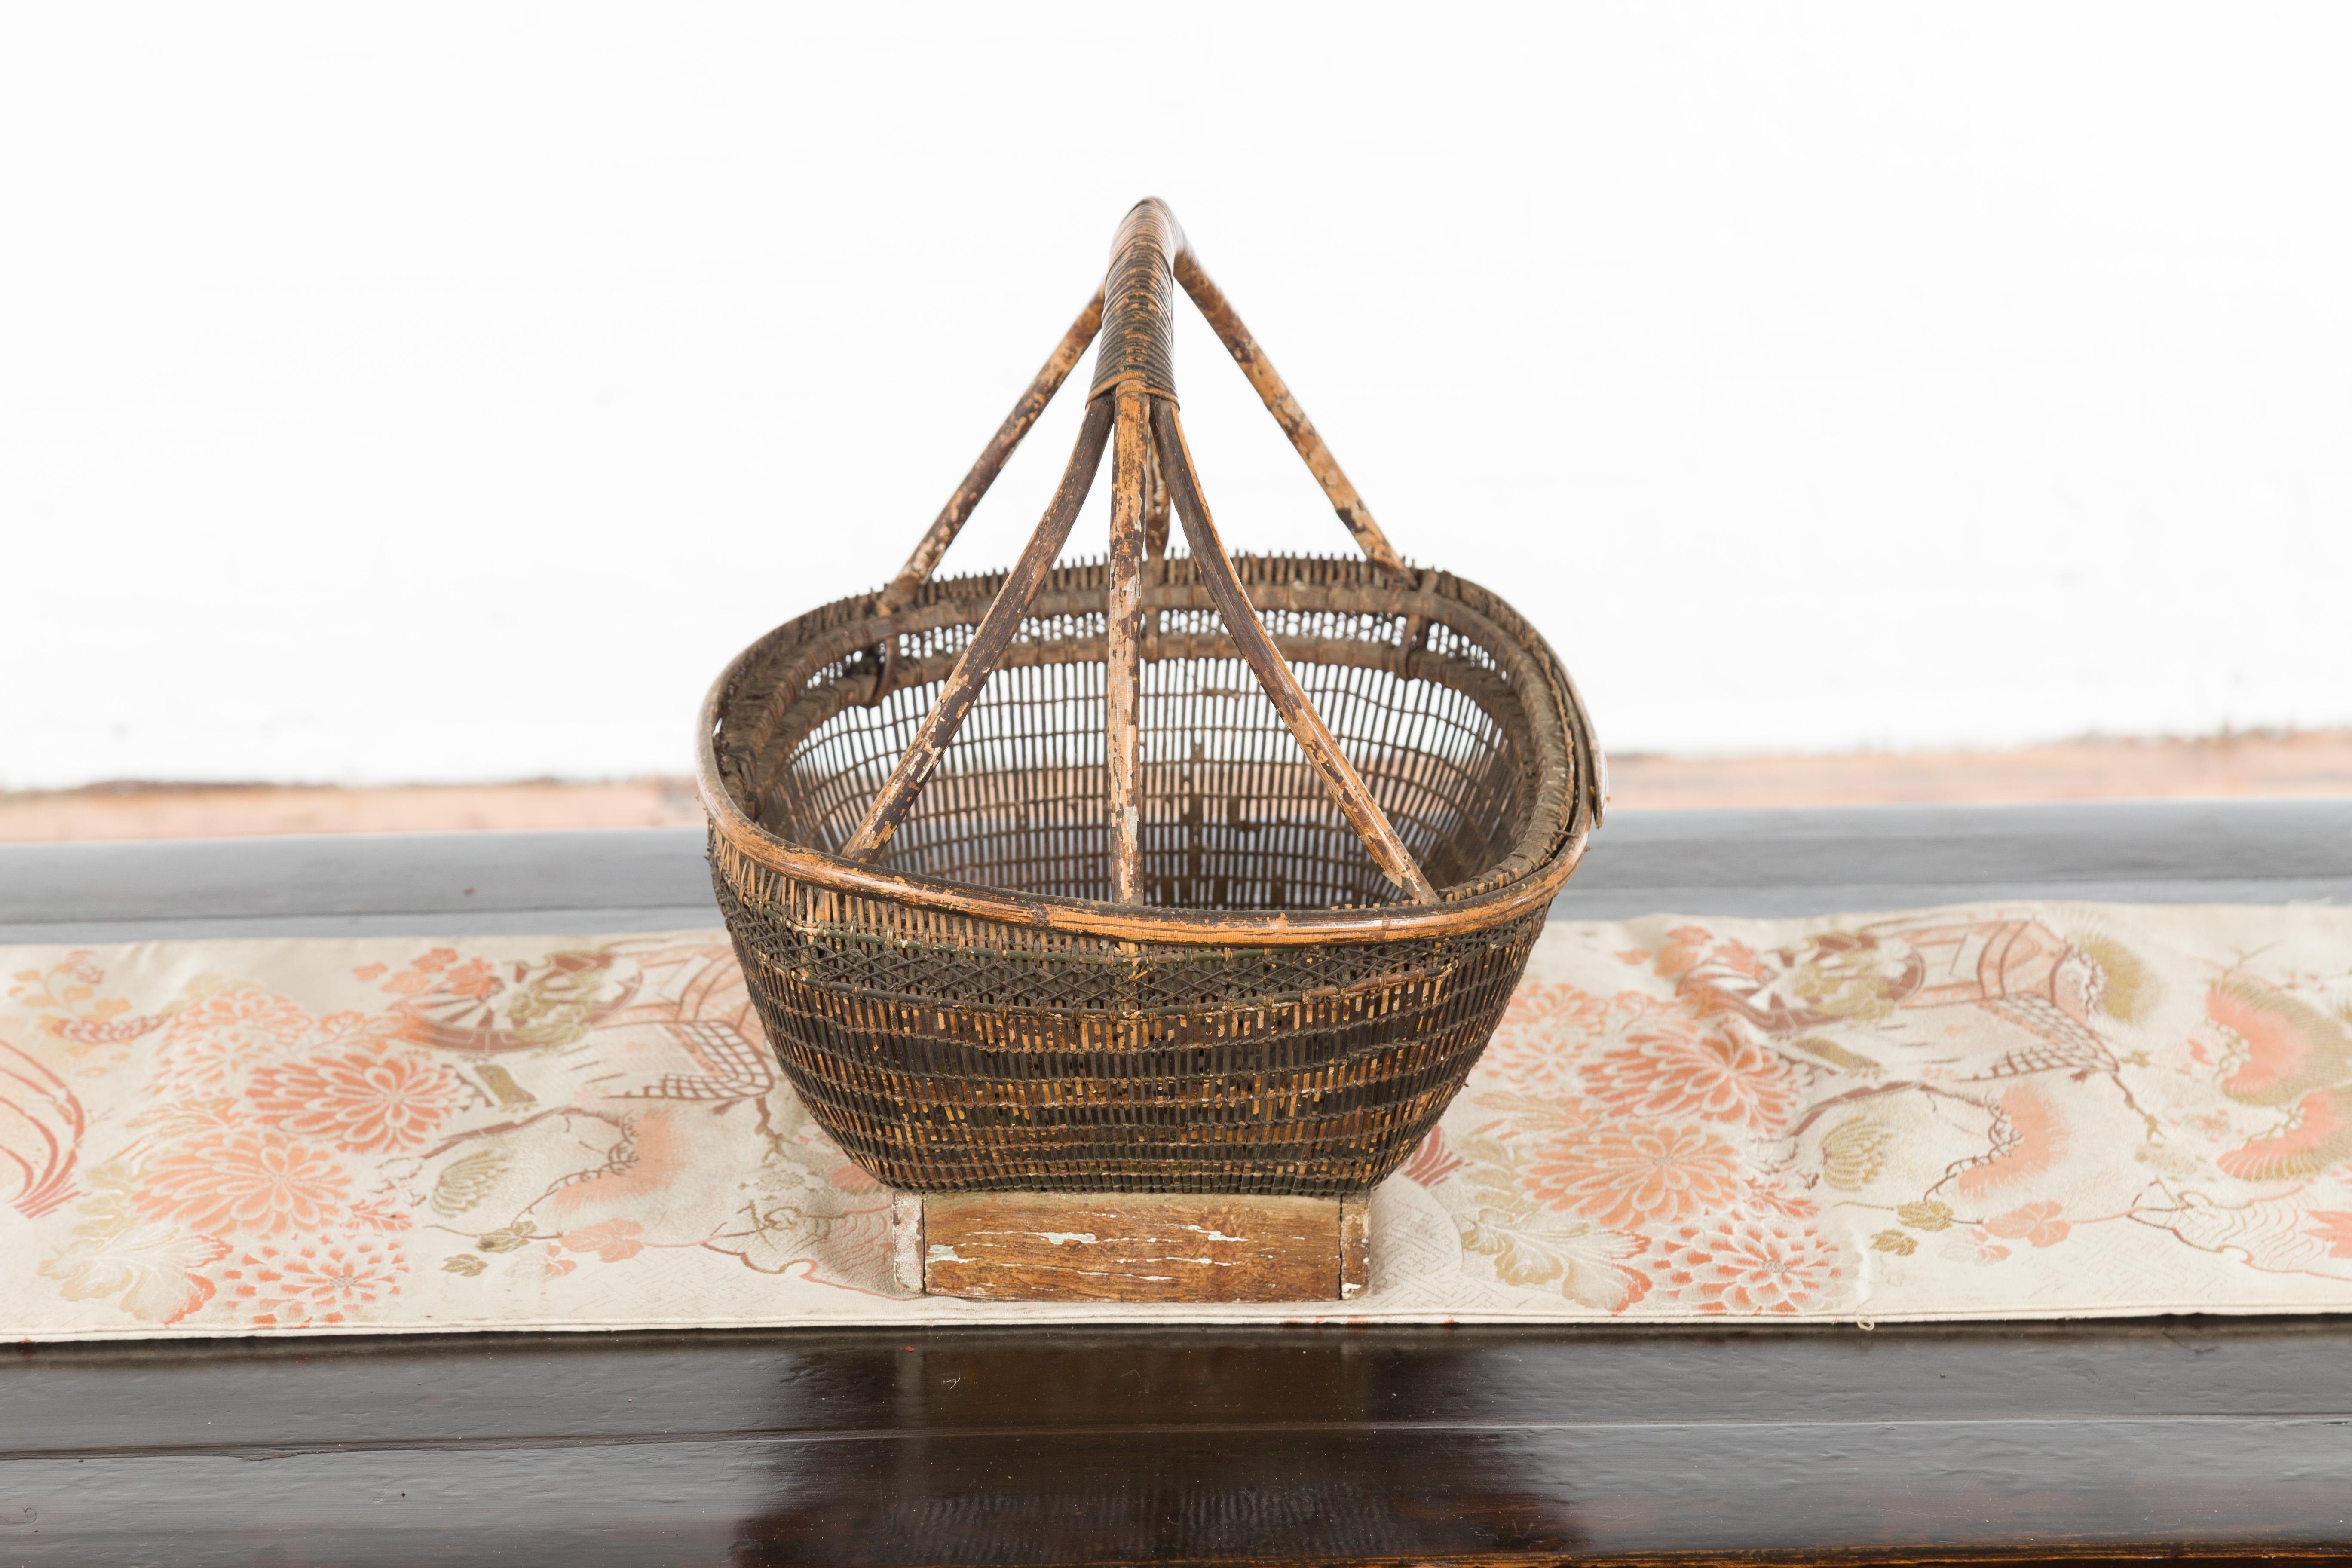 Chinese Rustic Vintage Woven Rattan Market Basket with Large Handle and Base 4